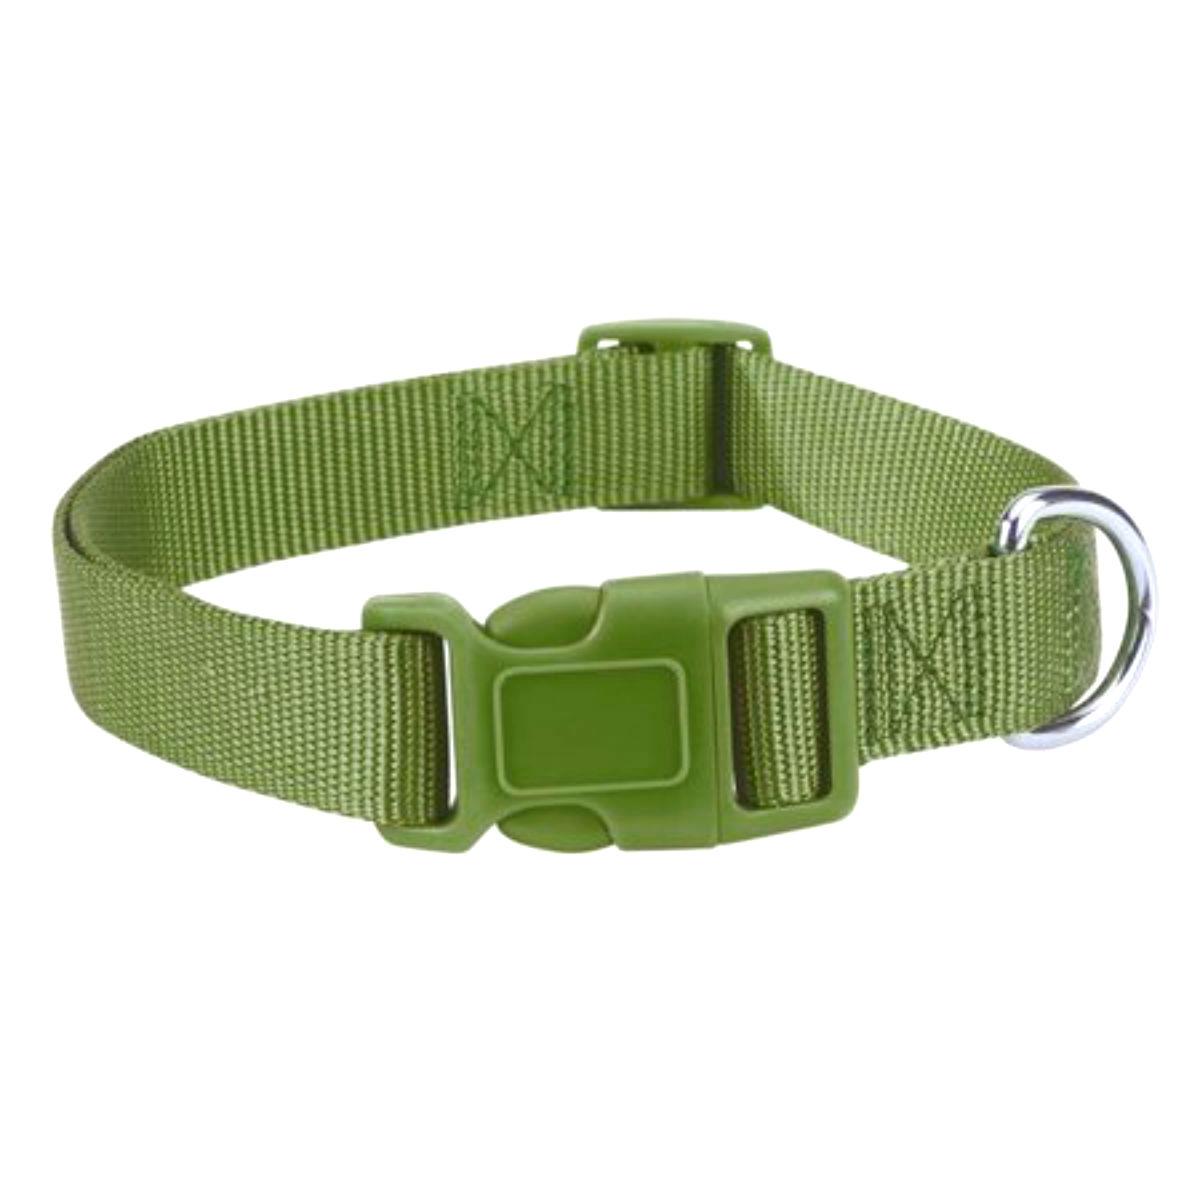 Casual Canine Nylon Dog Collar - Parrot Green